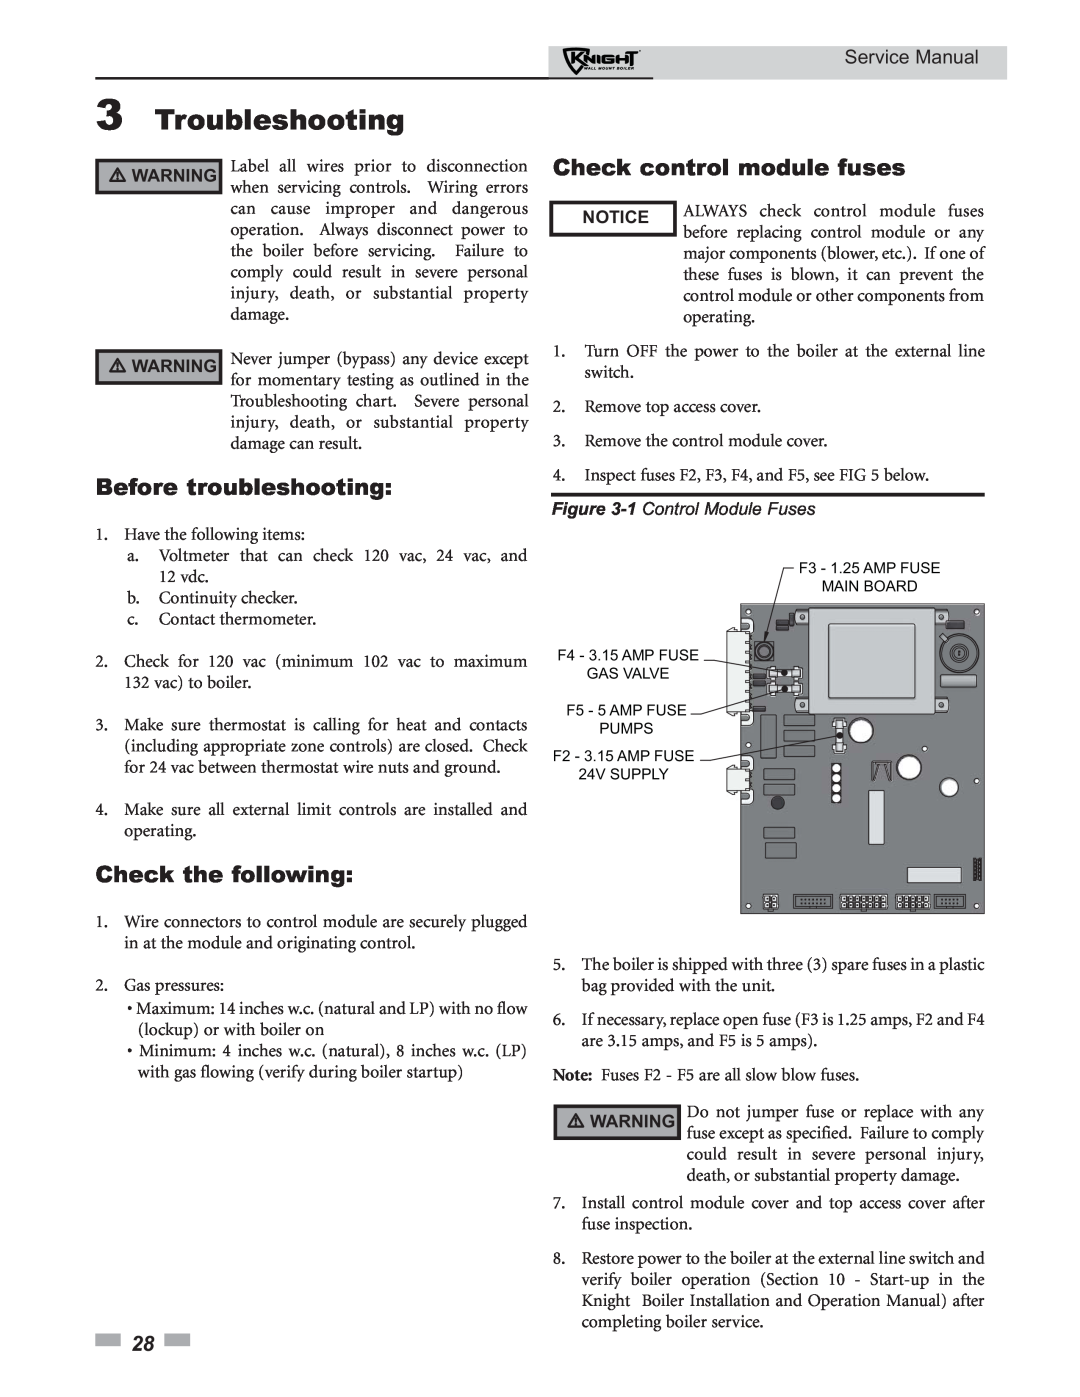 Lochinvar 50-210 Troubleshooting, Check control module fuses, Before troubleshooting, Check the following, Service Manual 